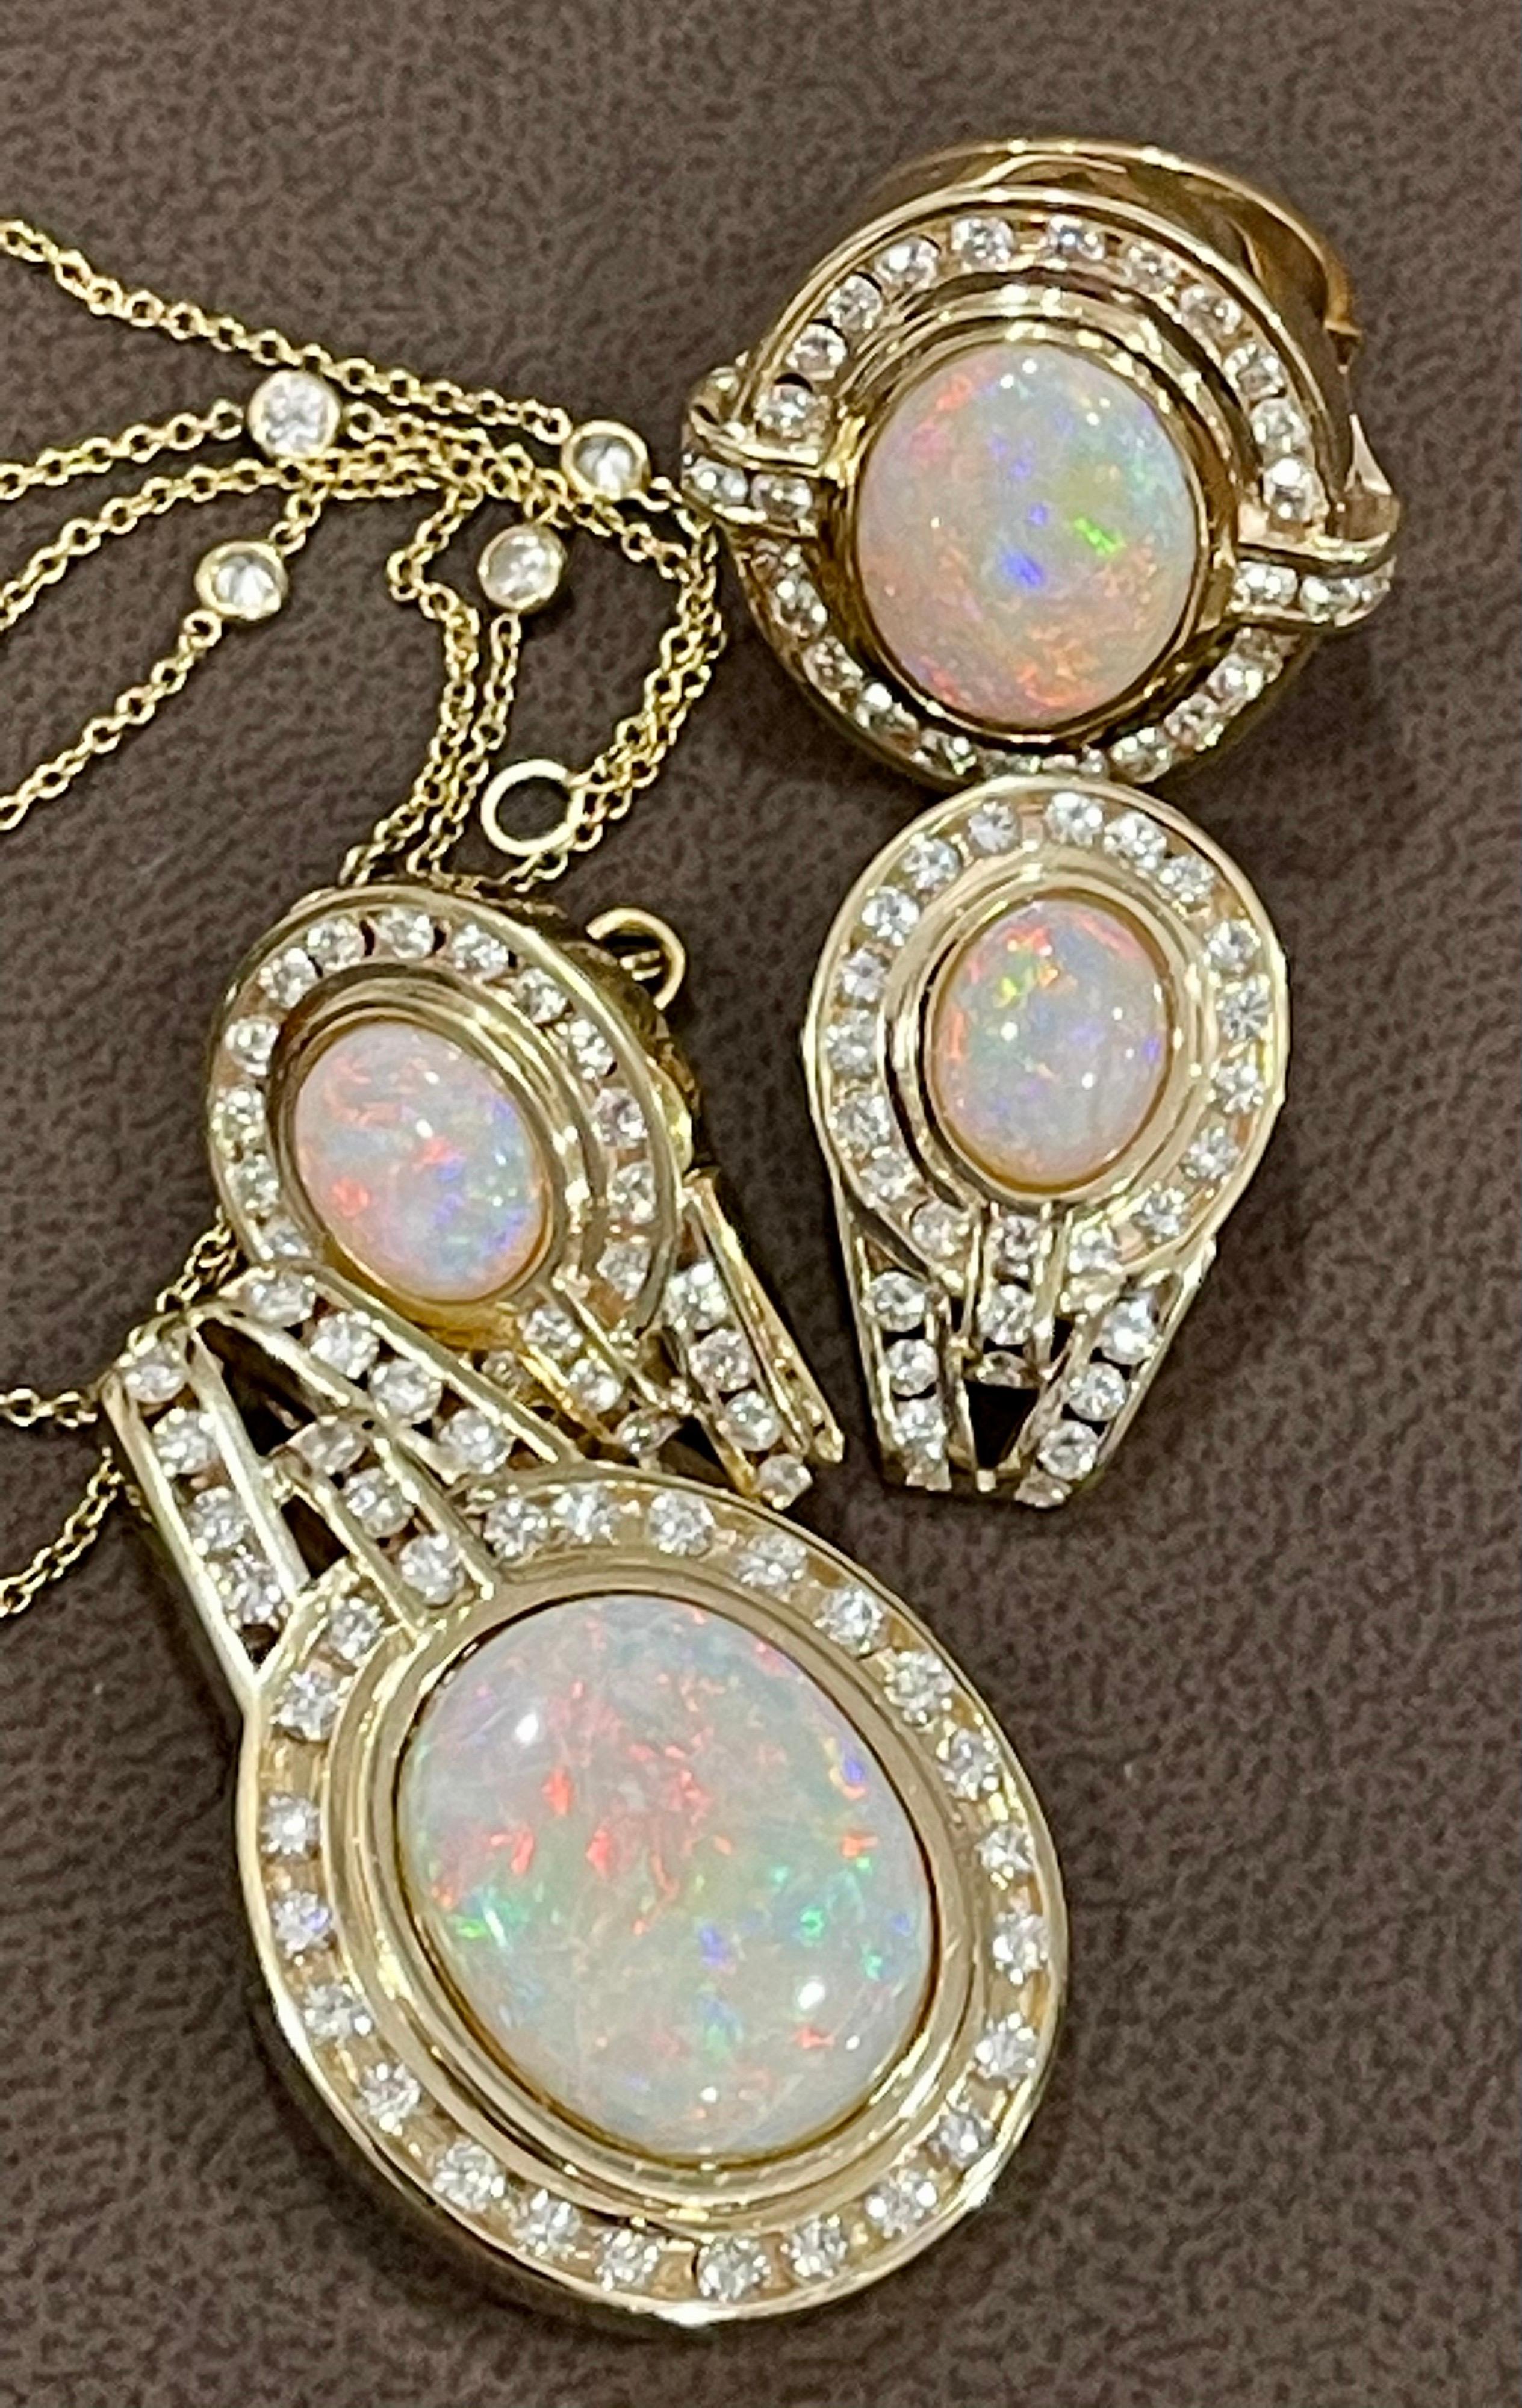 18.35  Carat Australian Opal & 4.57 Ct Diamond Pendant/Necklace/Ring 14 K Yellow  Gold set
This spectacular set consisting of  Australian Opal  includes Four  pieces . Comes with a Diamond by Yard Chain in yellow gold 
Chain is 18 inch in yellow